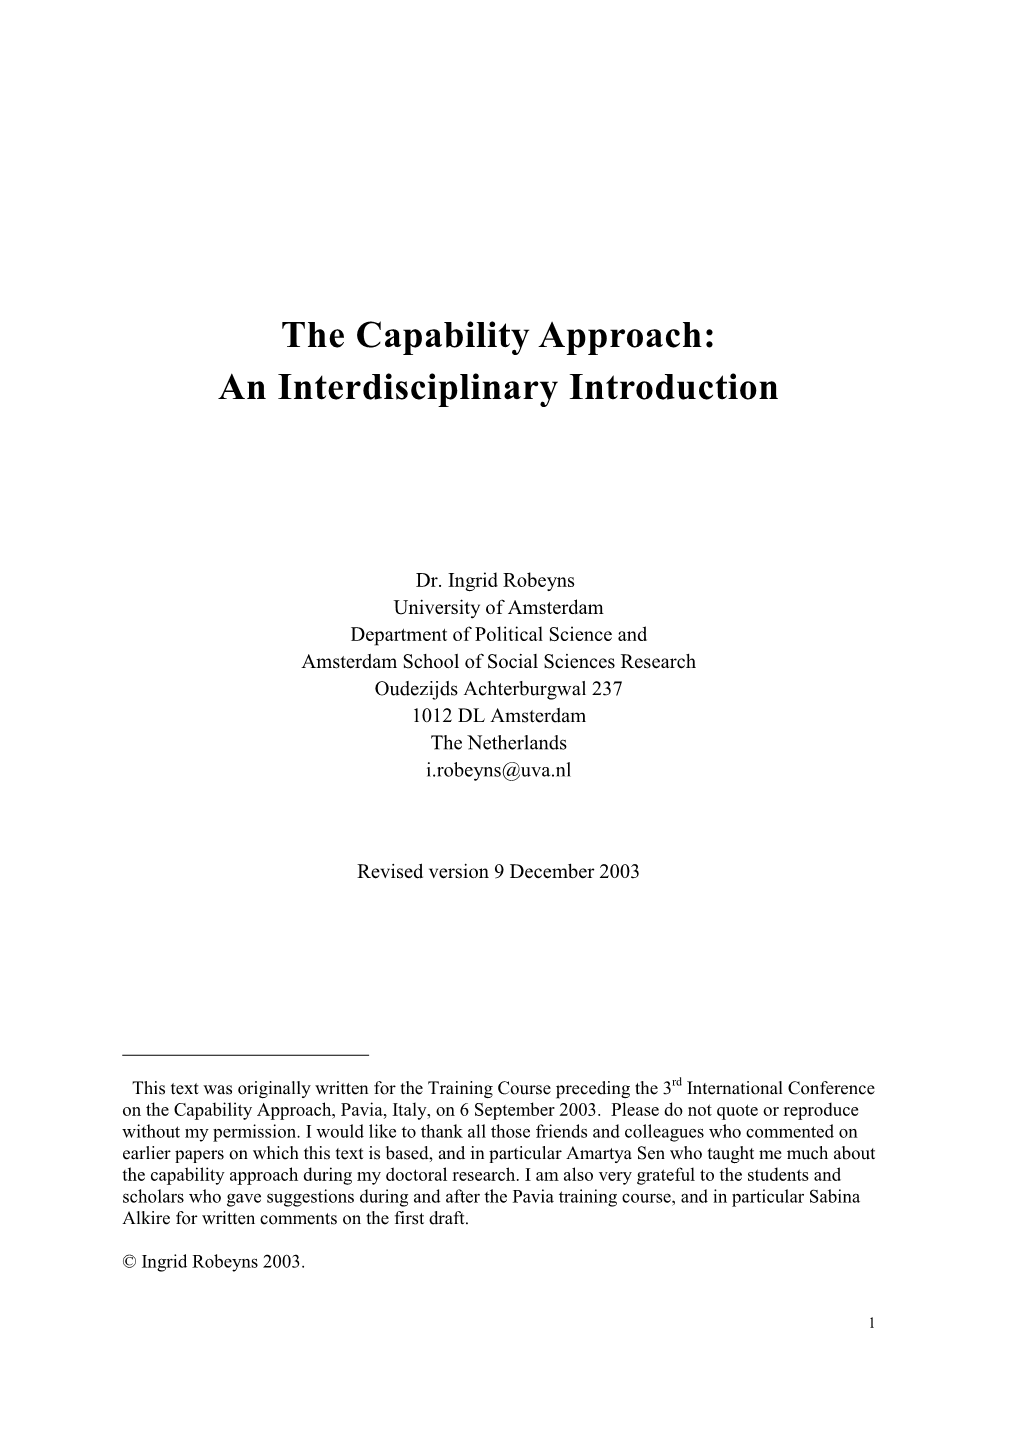 An Introduction to the Capability Approach